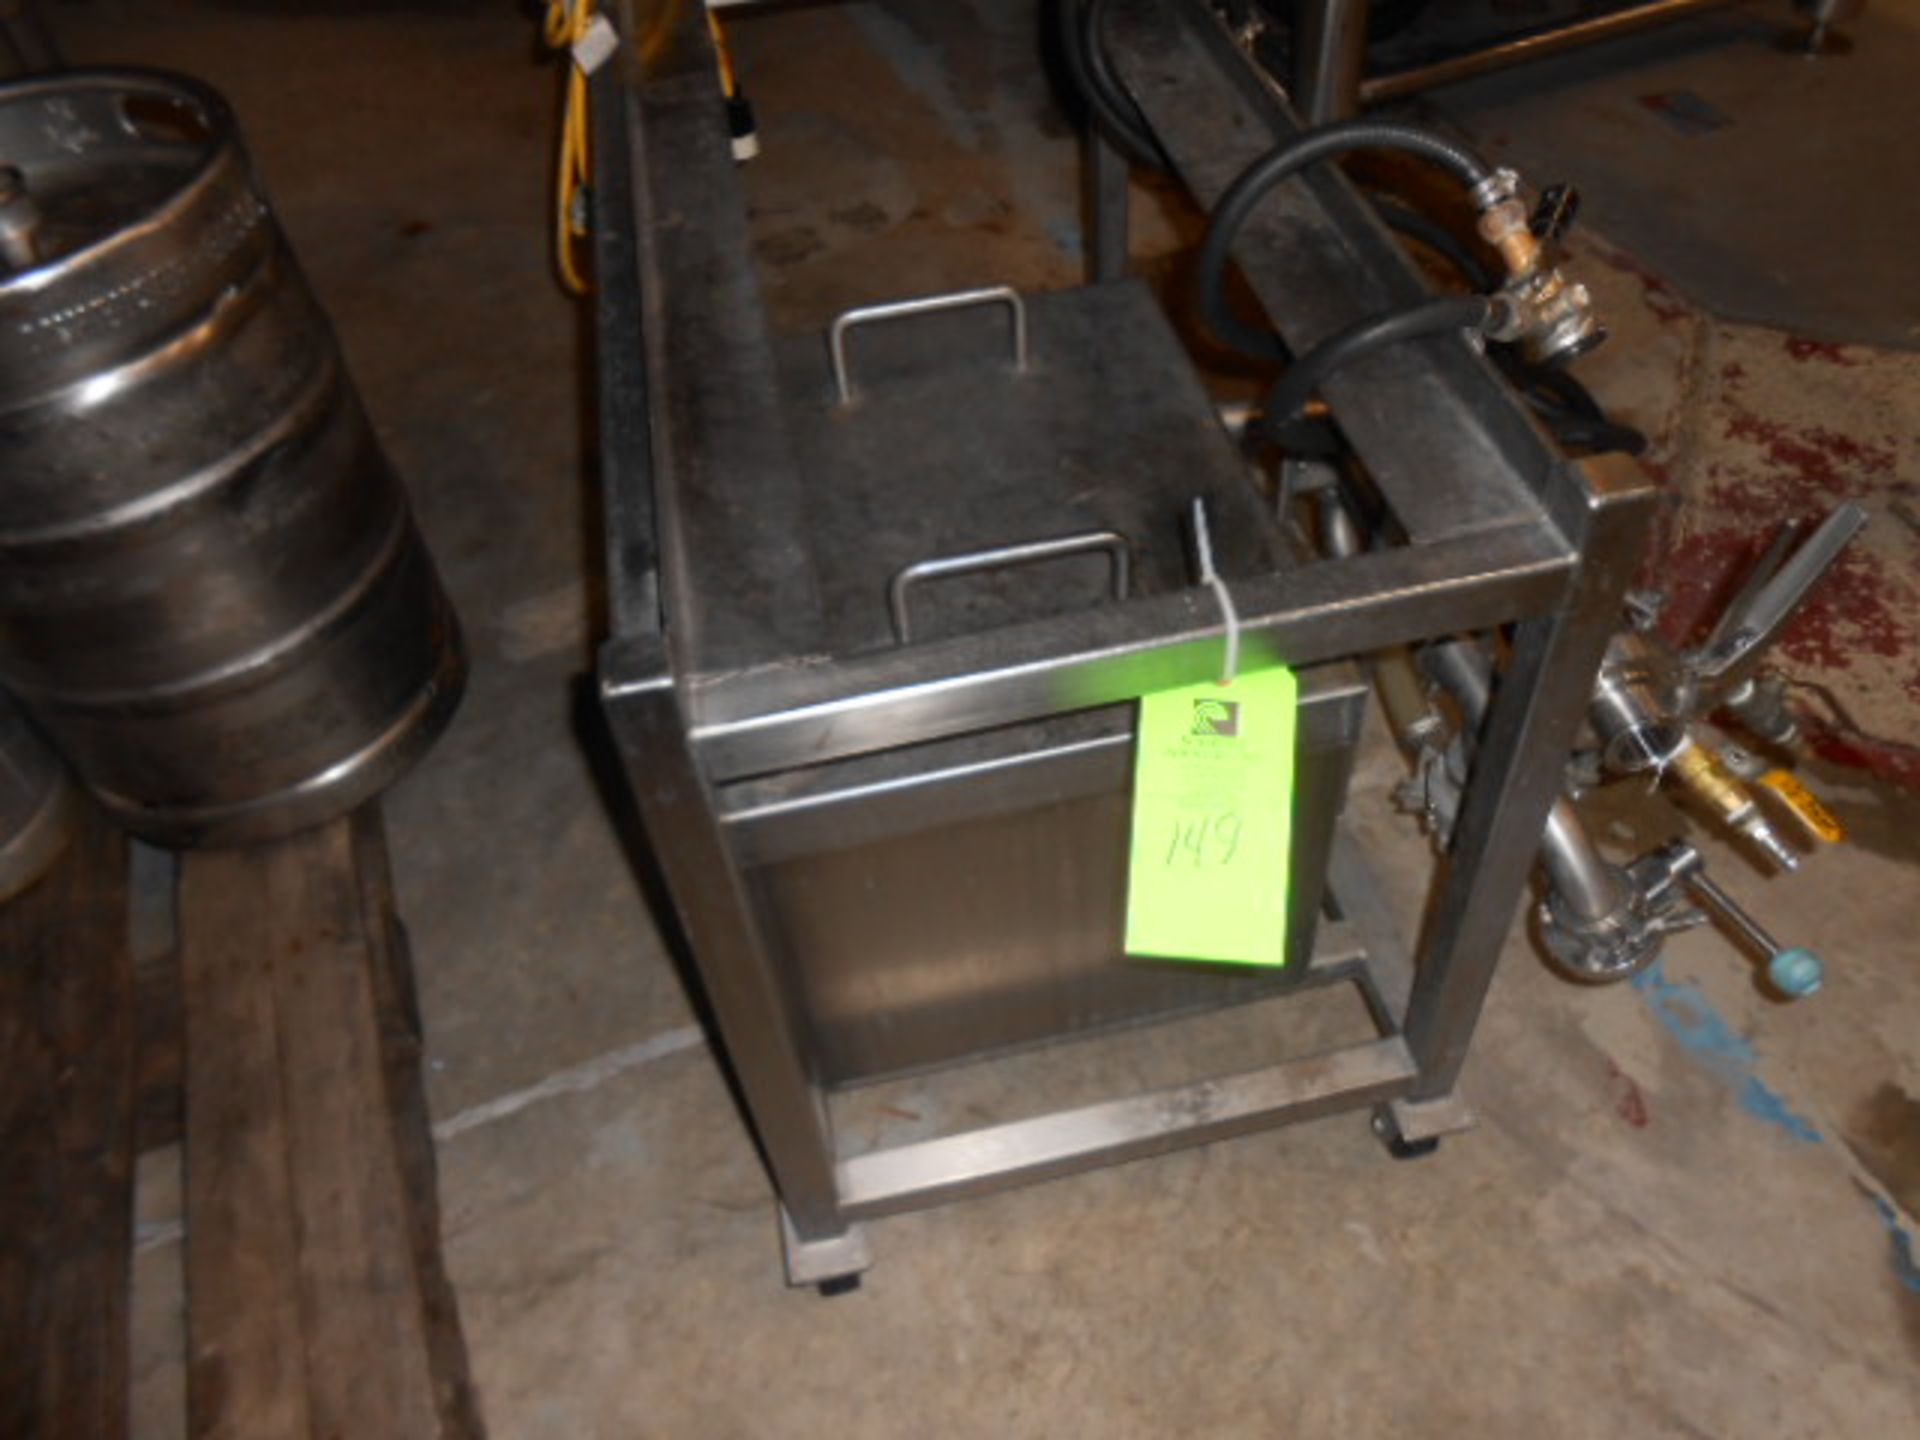 2 station keg washer with 20 in x 16 in x 20 deep tank, Sanke connections, REQUIRES PLANT - Image 2 of 3